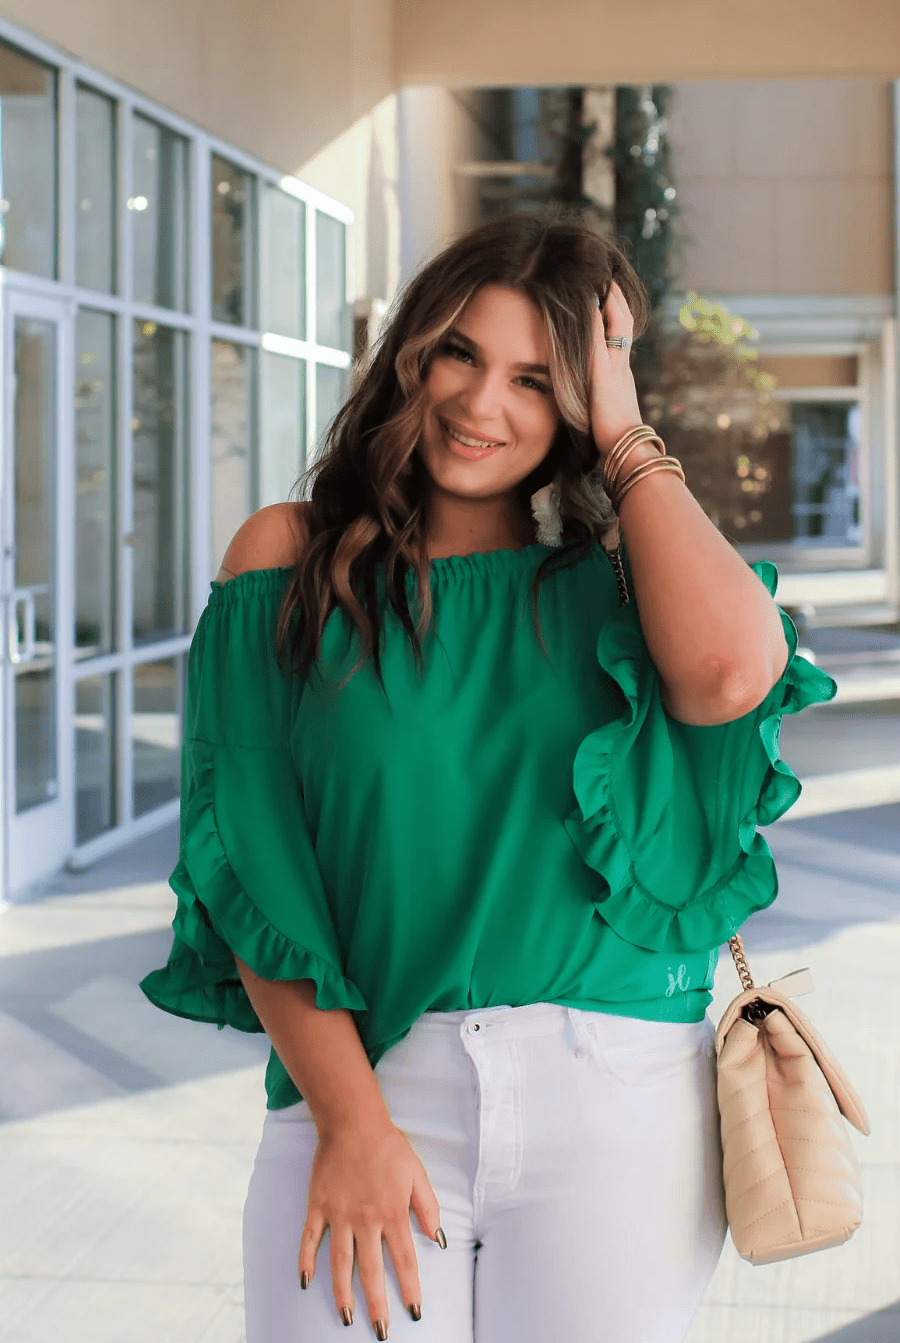 
  
  Ashley Top: Elegant Style for Any Occasion
  
